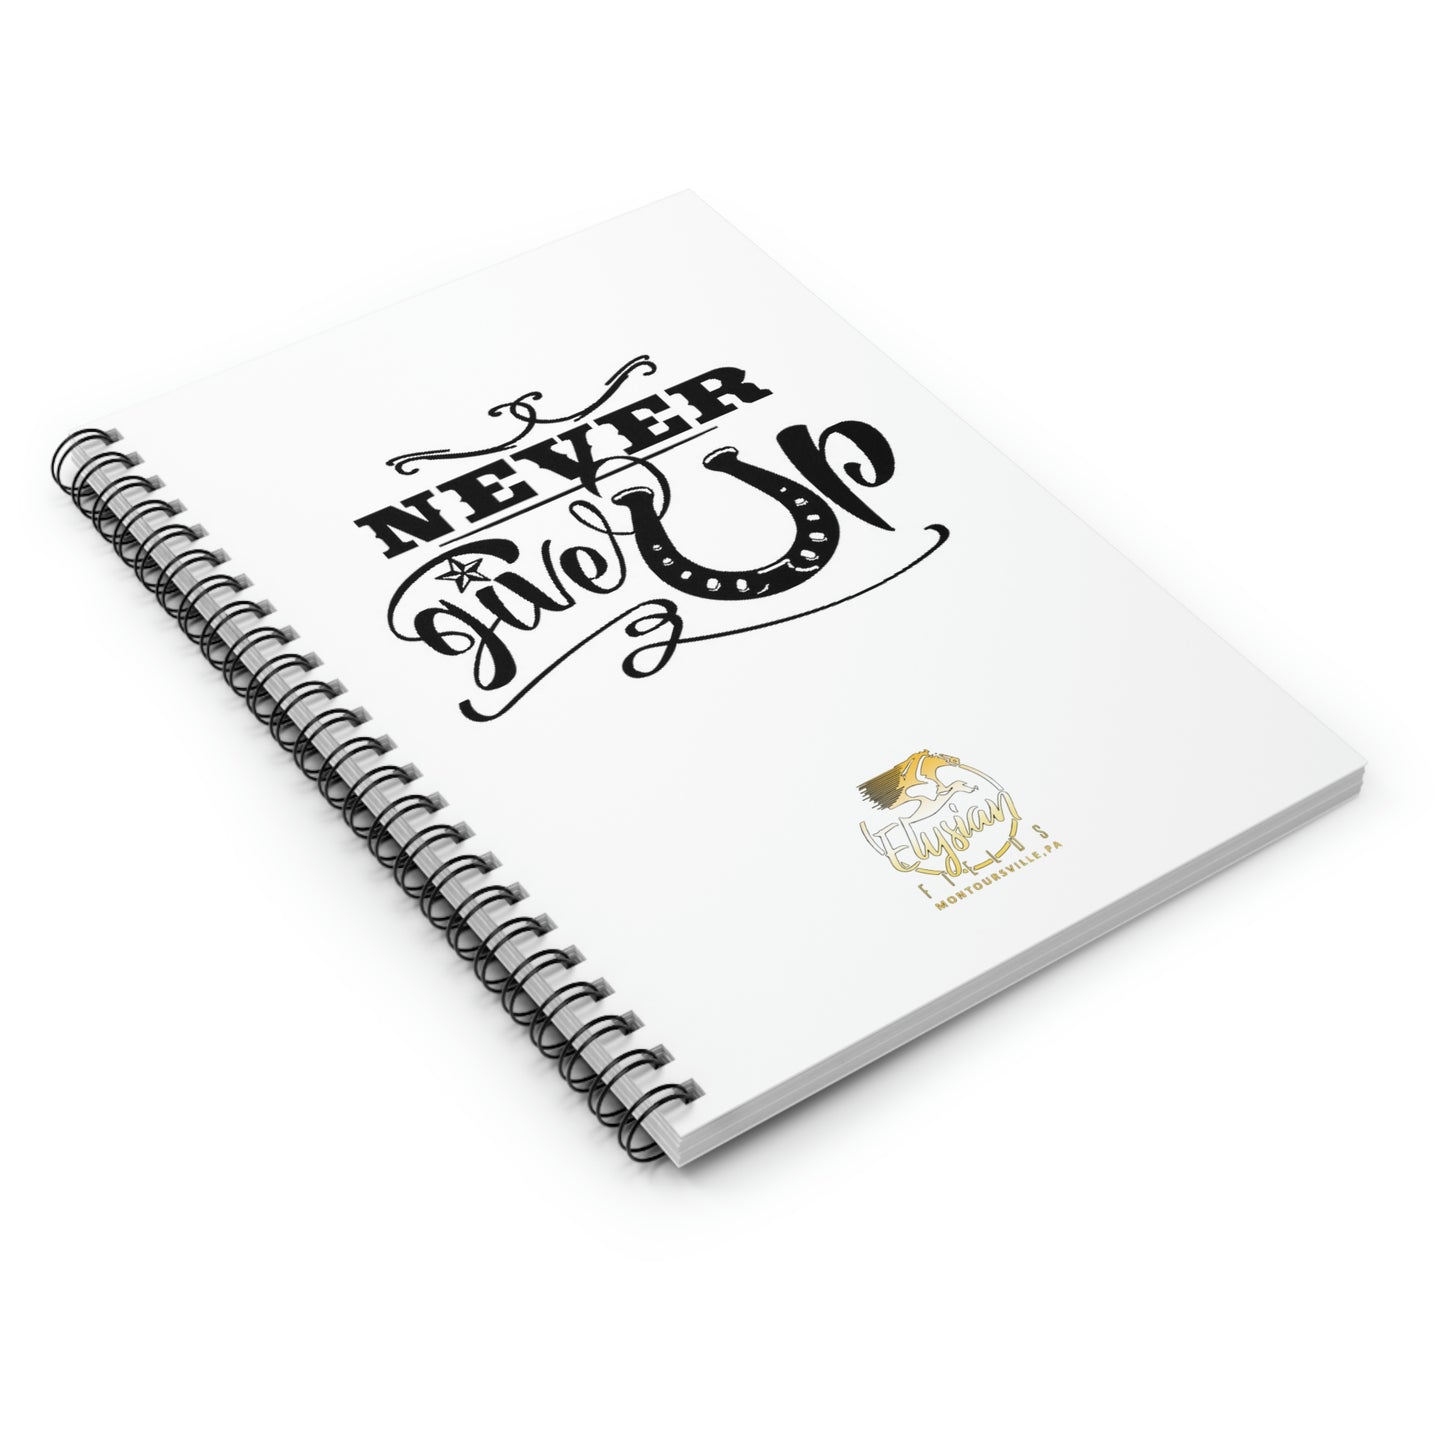 Never Give Up - Spiral Notebook - Ruled Line